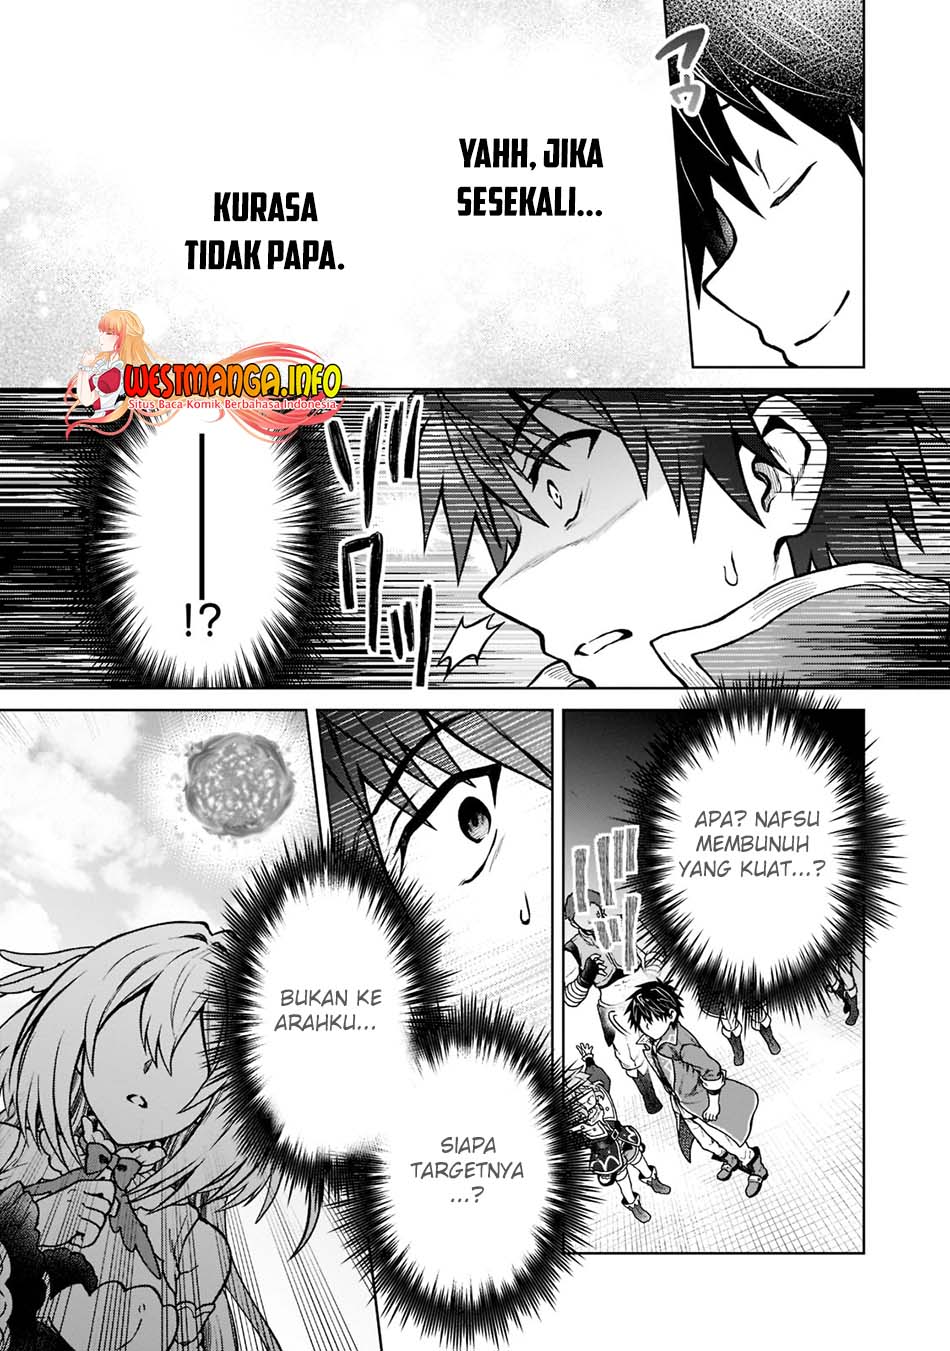 Dilarang COPAS - situs resmi www.mangacanblog.com - Komik d rank adventurer invited by a brave party and the stalking princess 011 - chapter 11 12 Indonesia d rank adventurer invited by a brave party and the stalking princess 011 - chapter 11 Terbaru 26|Baca Manga Komik Indonesia|Mangacan